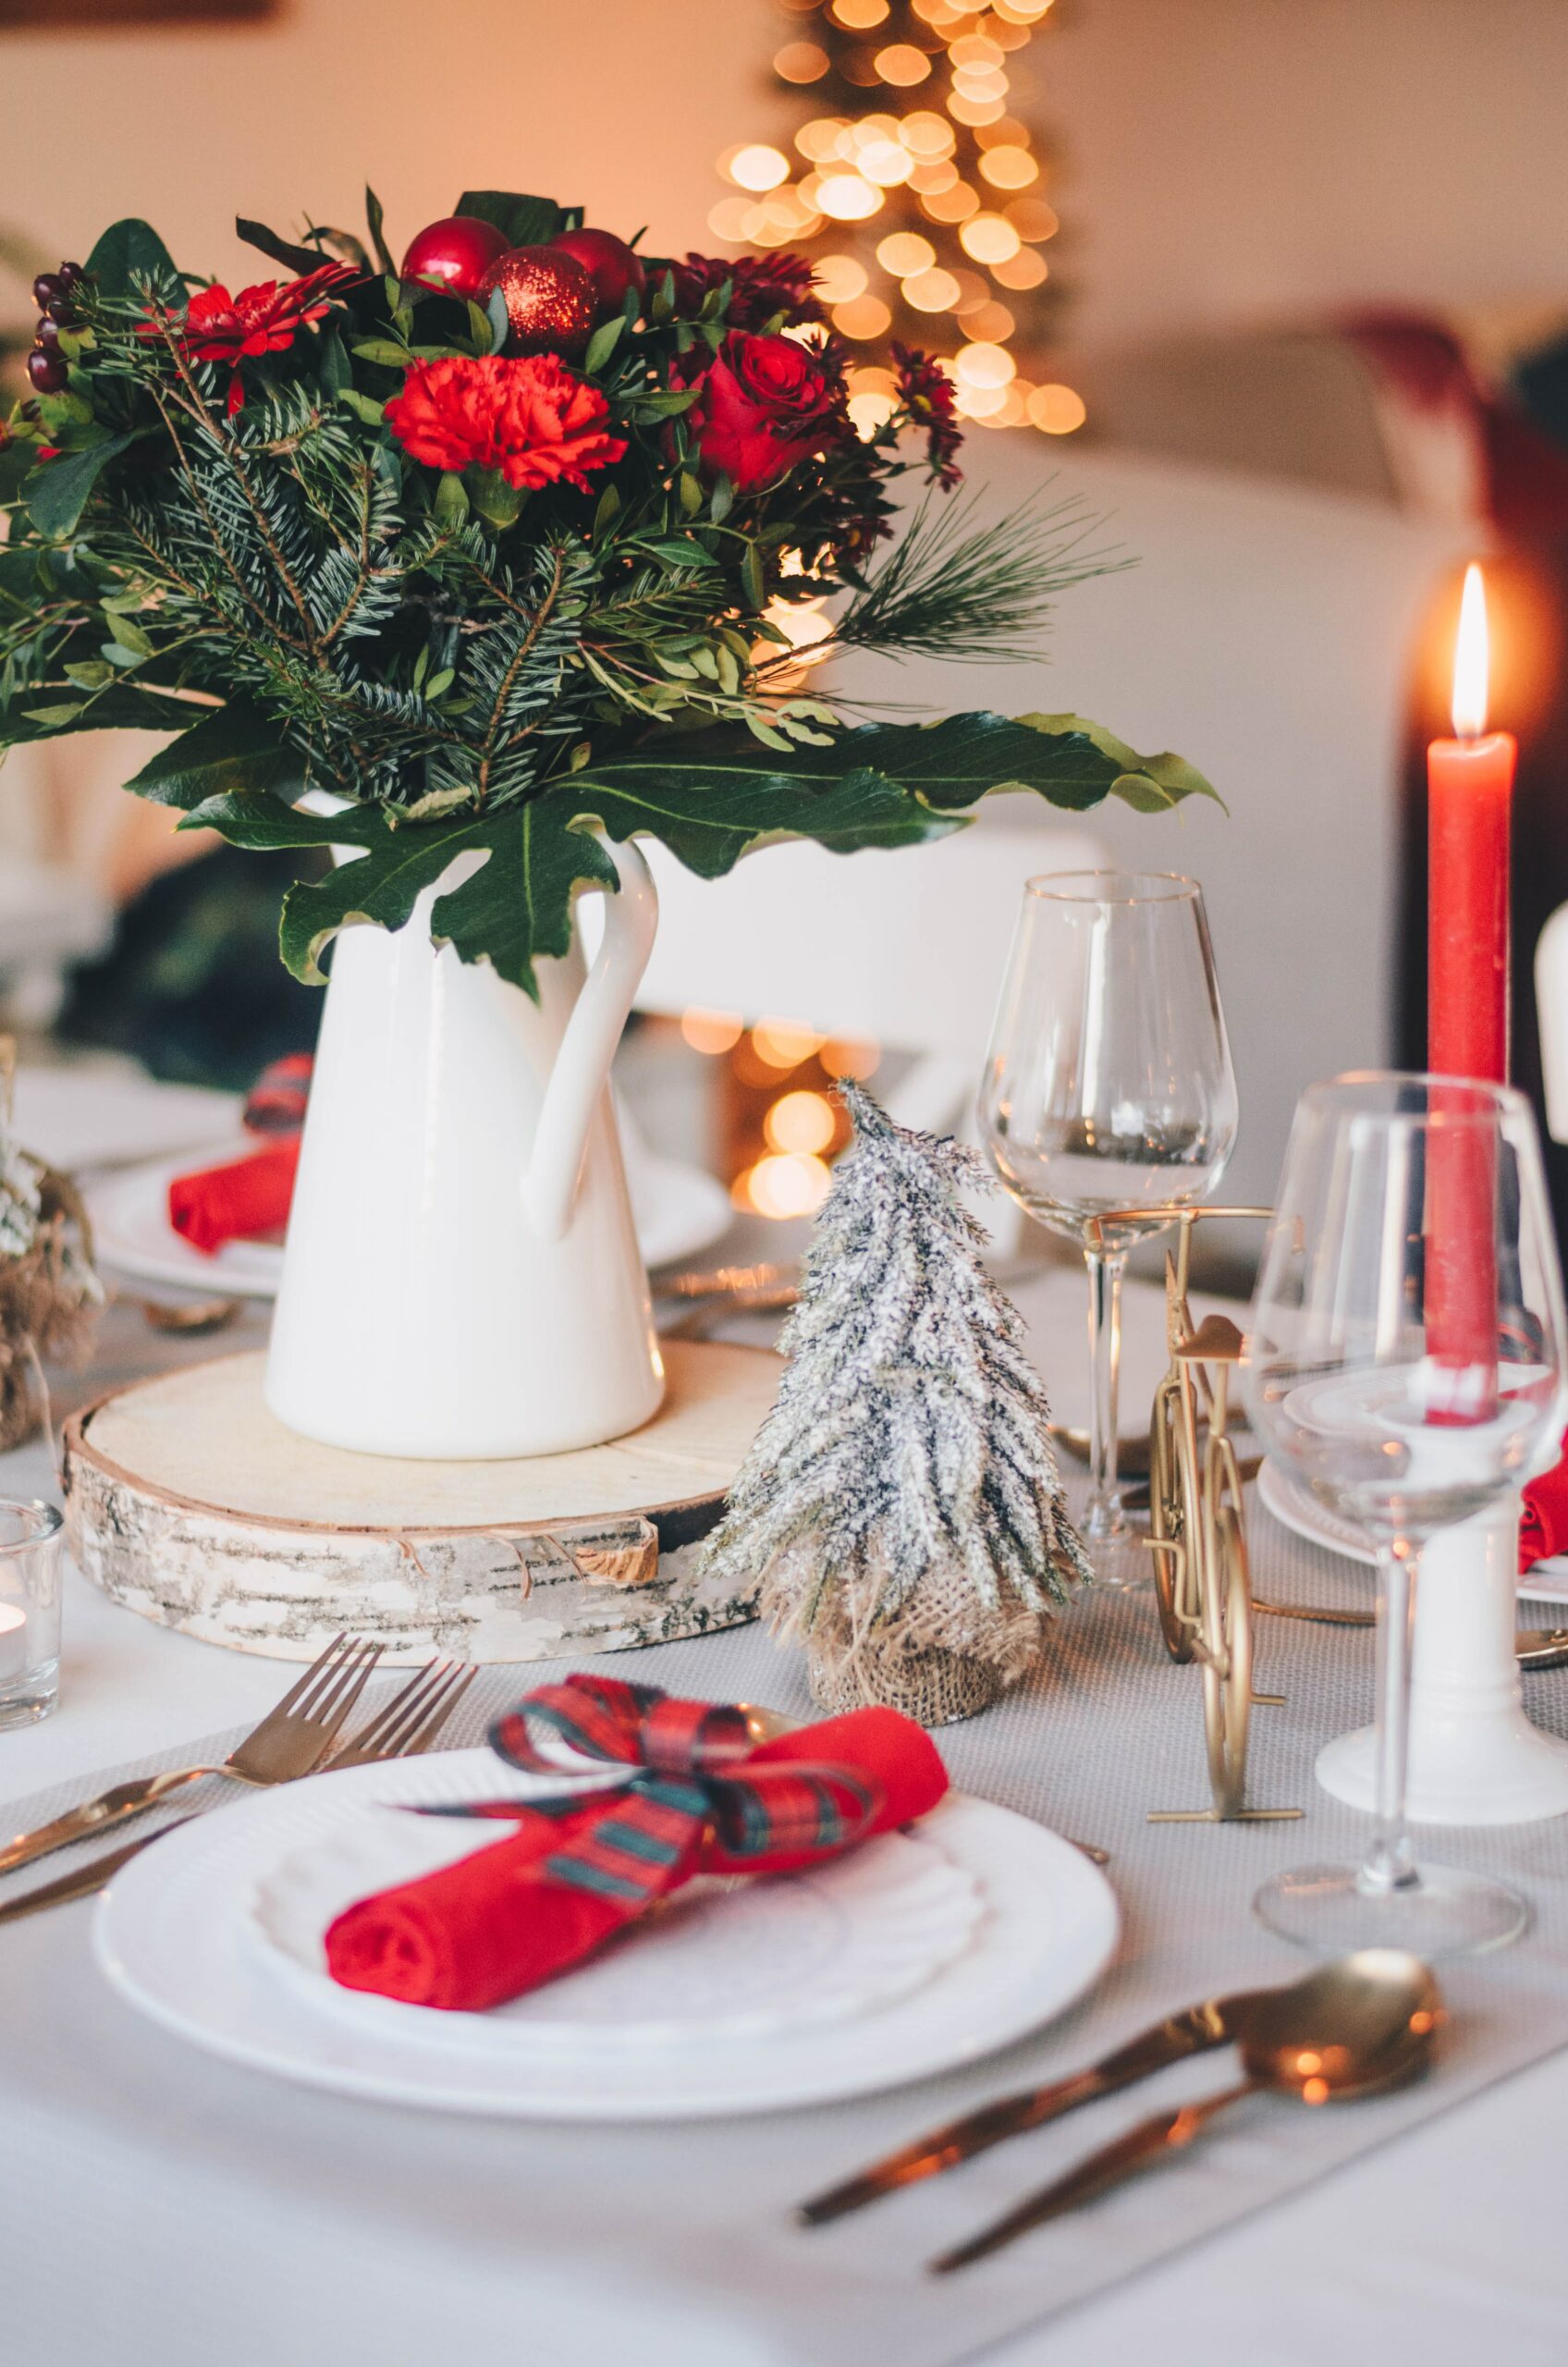 holiday dinner by libby penner on unsplash